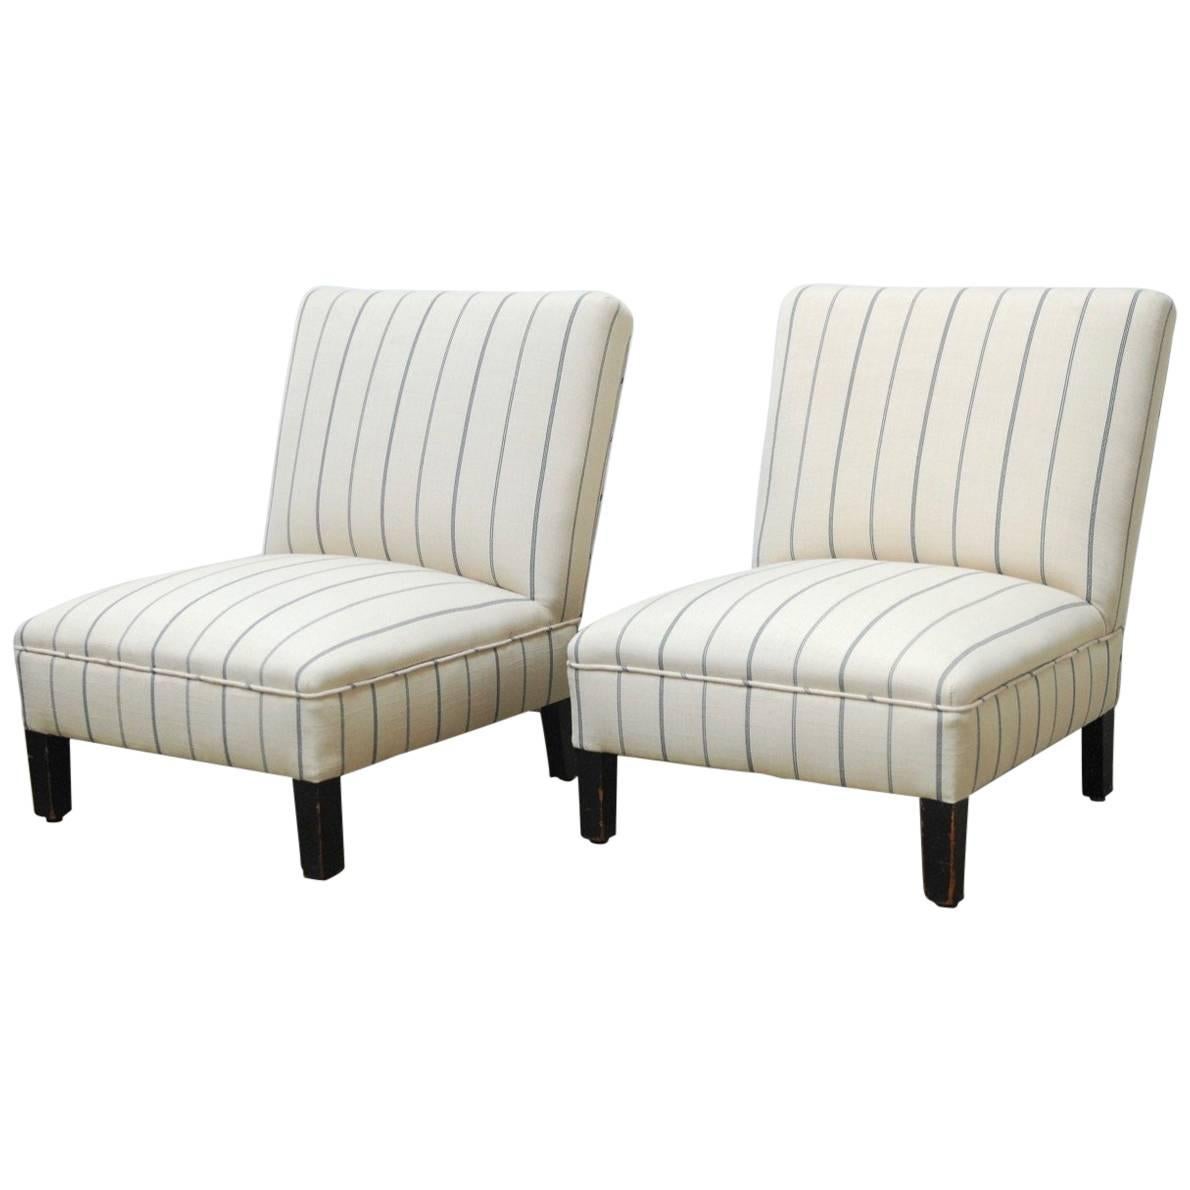 Pair of French Linen Striped Slipper Chairs